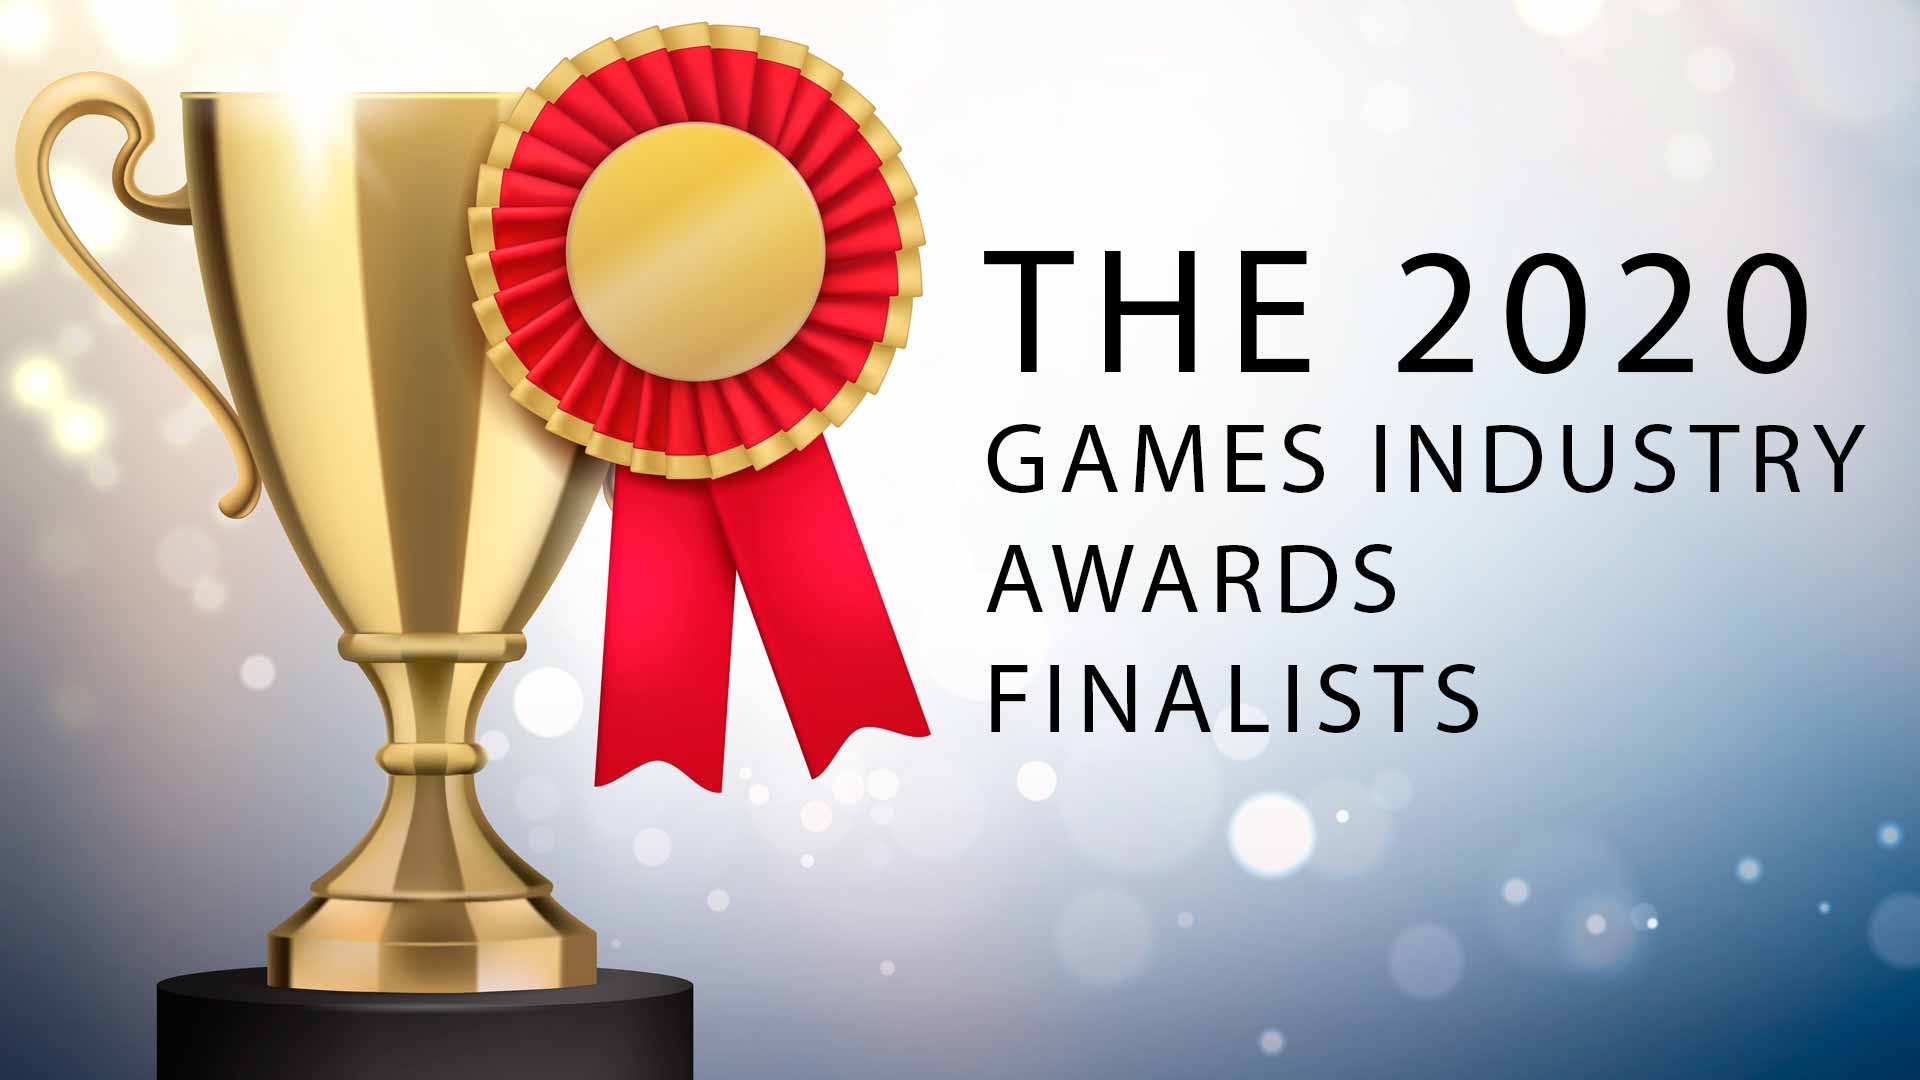 The 2020 Games Industry Awards Finalists